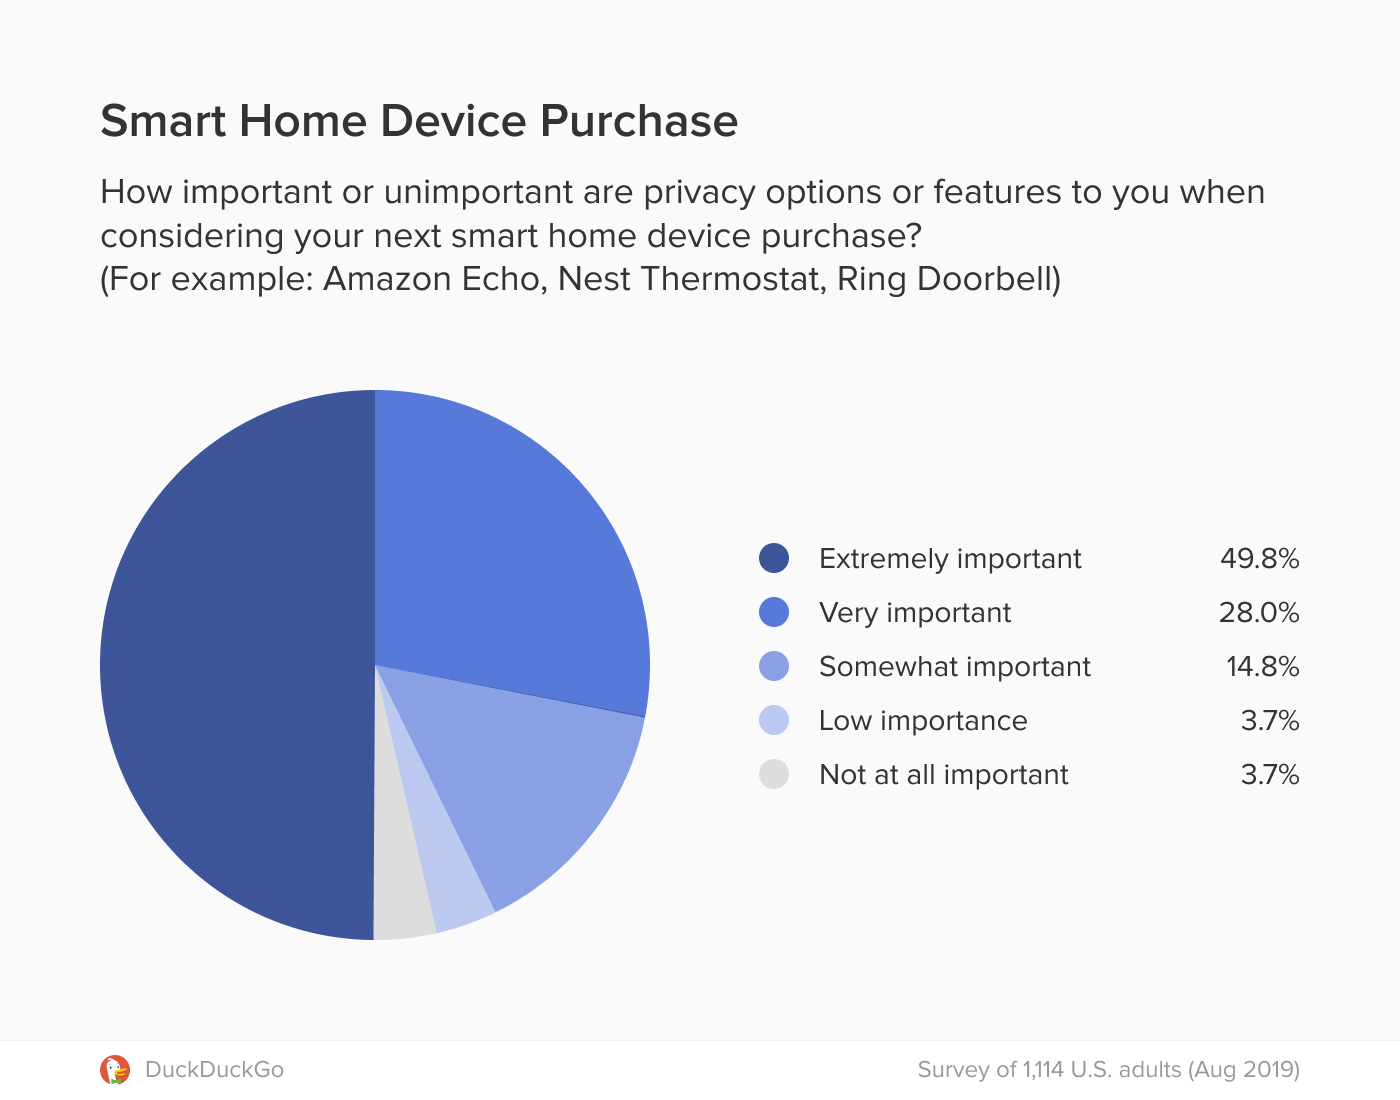 Chart showing importance of smart home device privacy features for respondents.